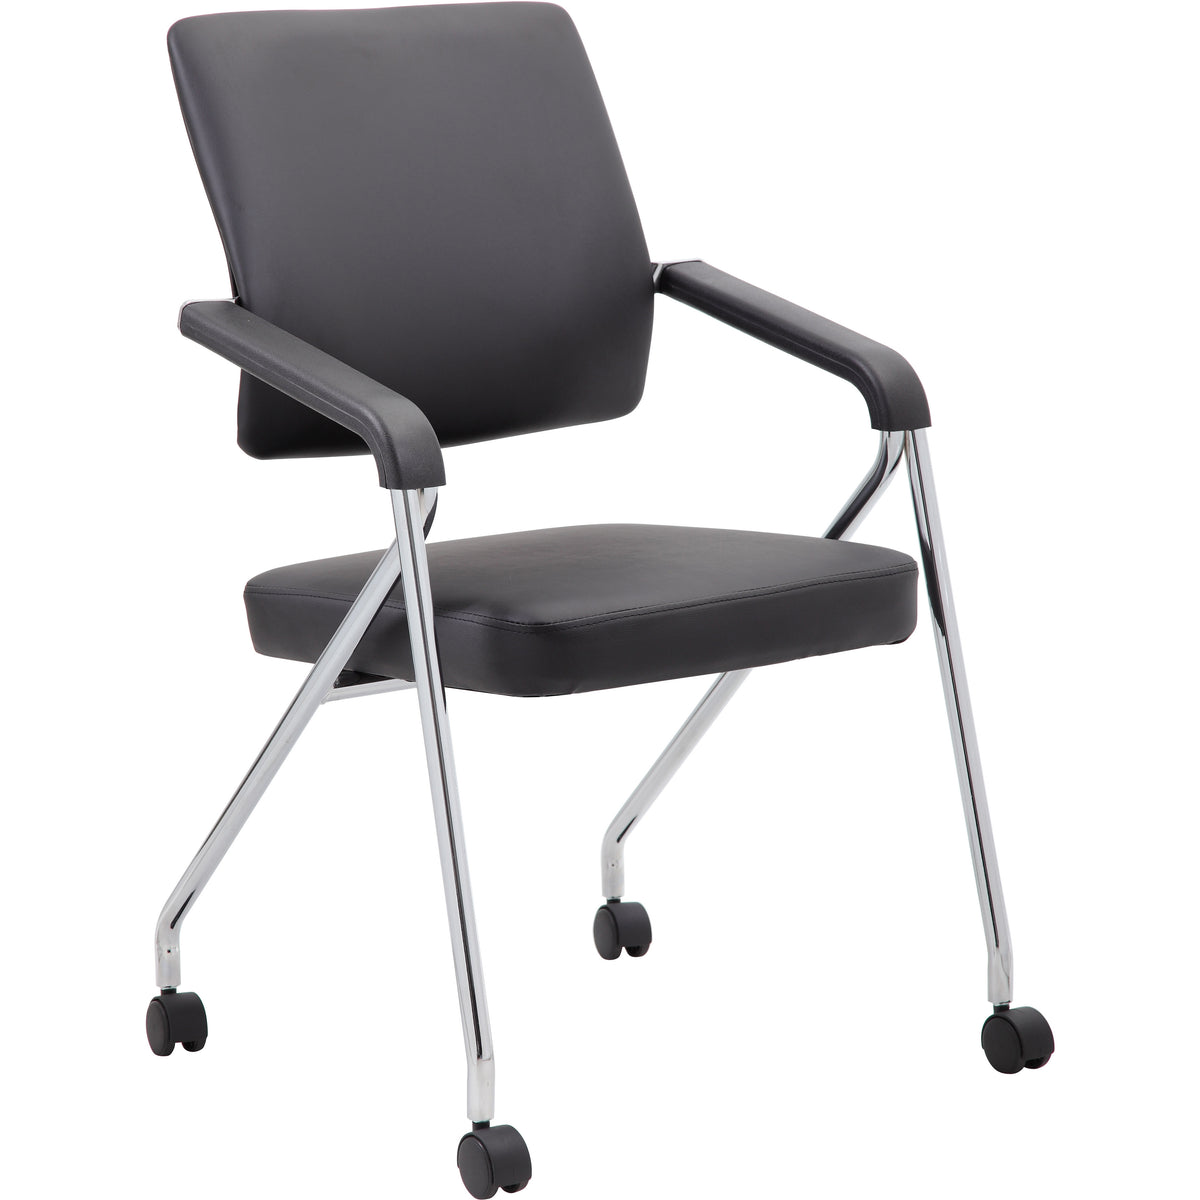 Black Caressoft Plus Training Chair With Chrome Frame (Pack of 2), B1800-CP-2